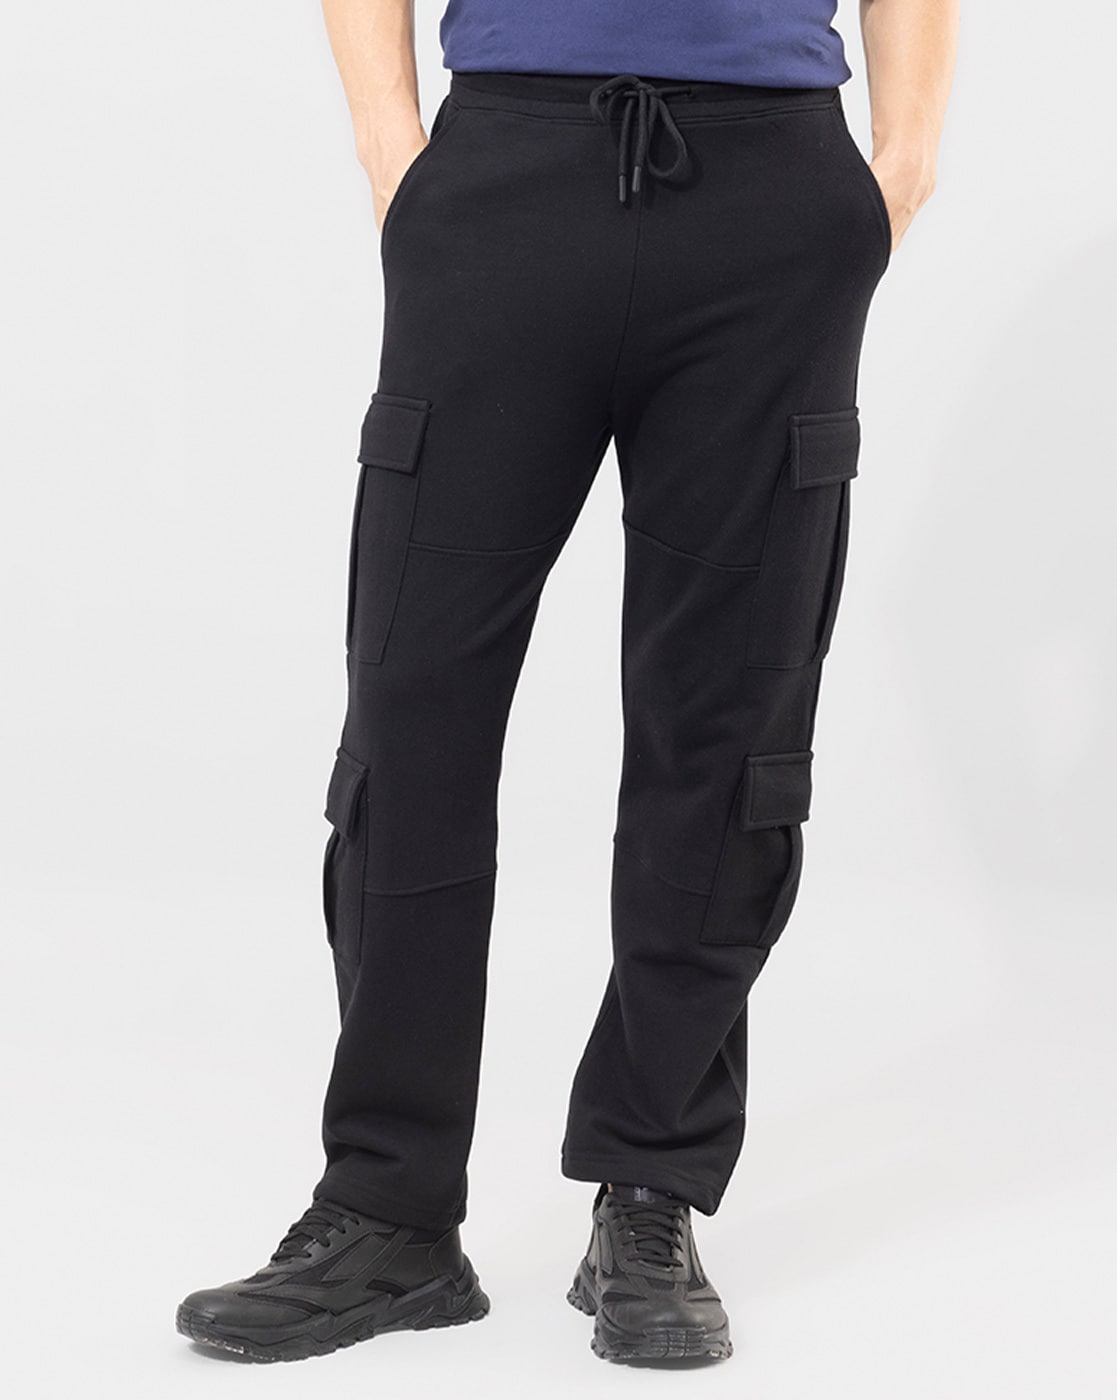 Rothco Tactical BDU Solid Black Cargo Pants | Zumiez